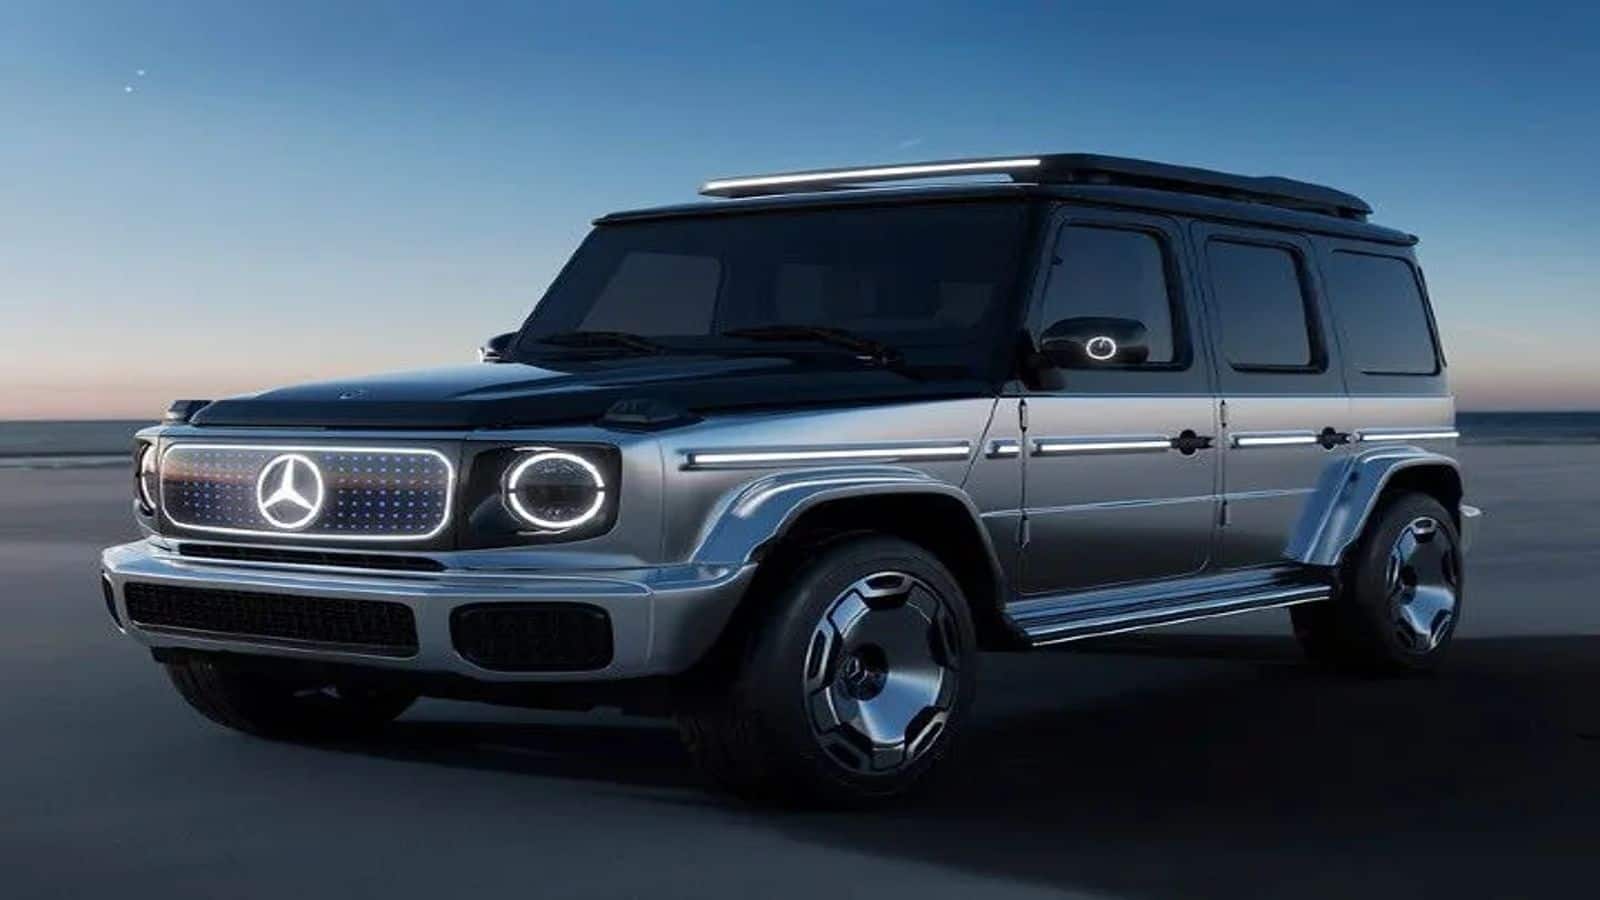 Mercedes-Benz to unveil electric G-Class SUV on April 24